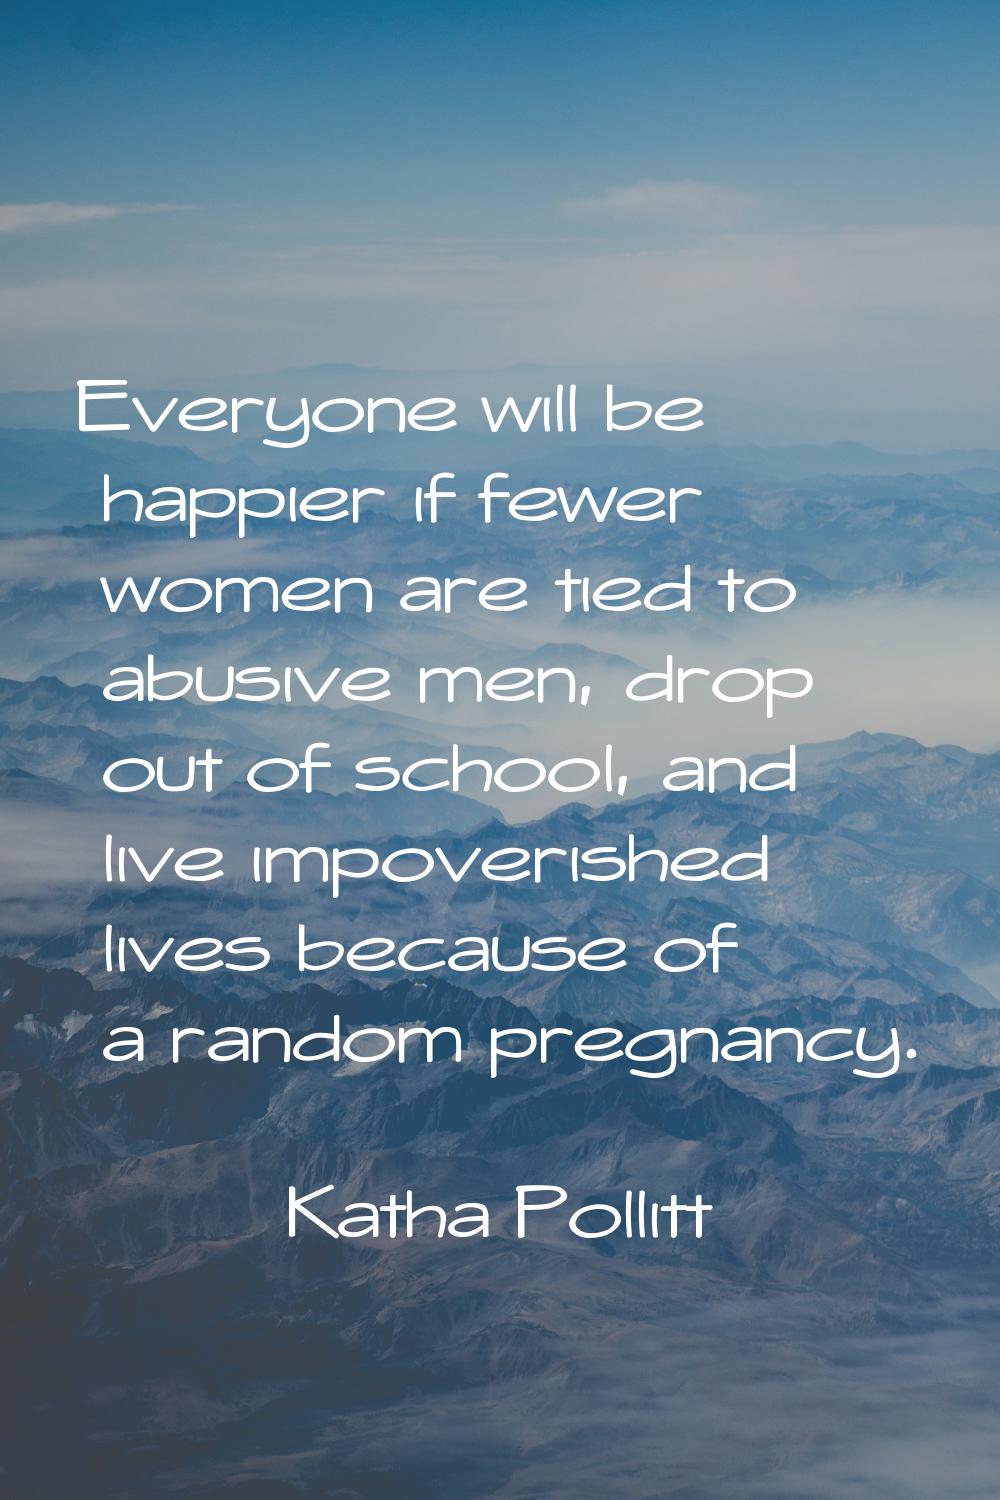 Everyone will be happier if fewer women are tied to abusive men, drop out of school, and live impov